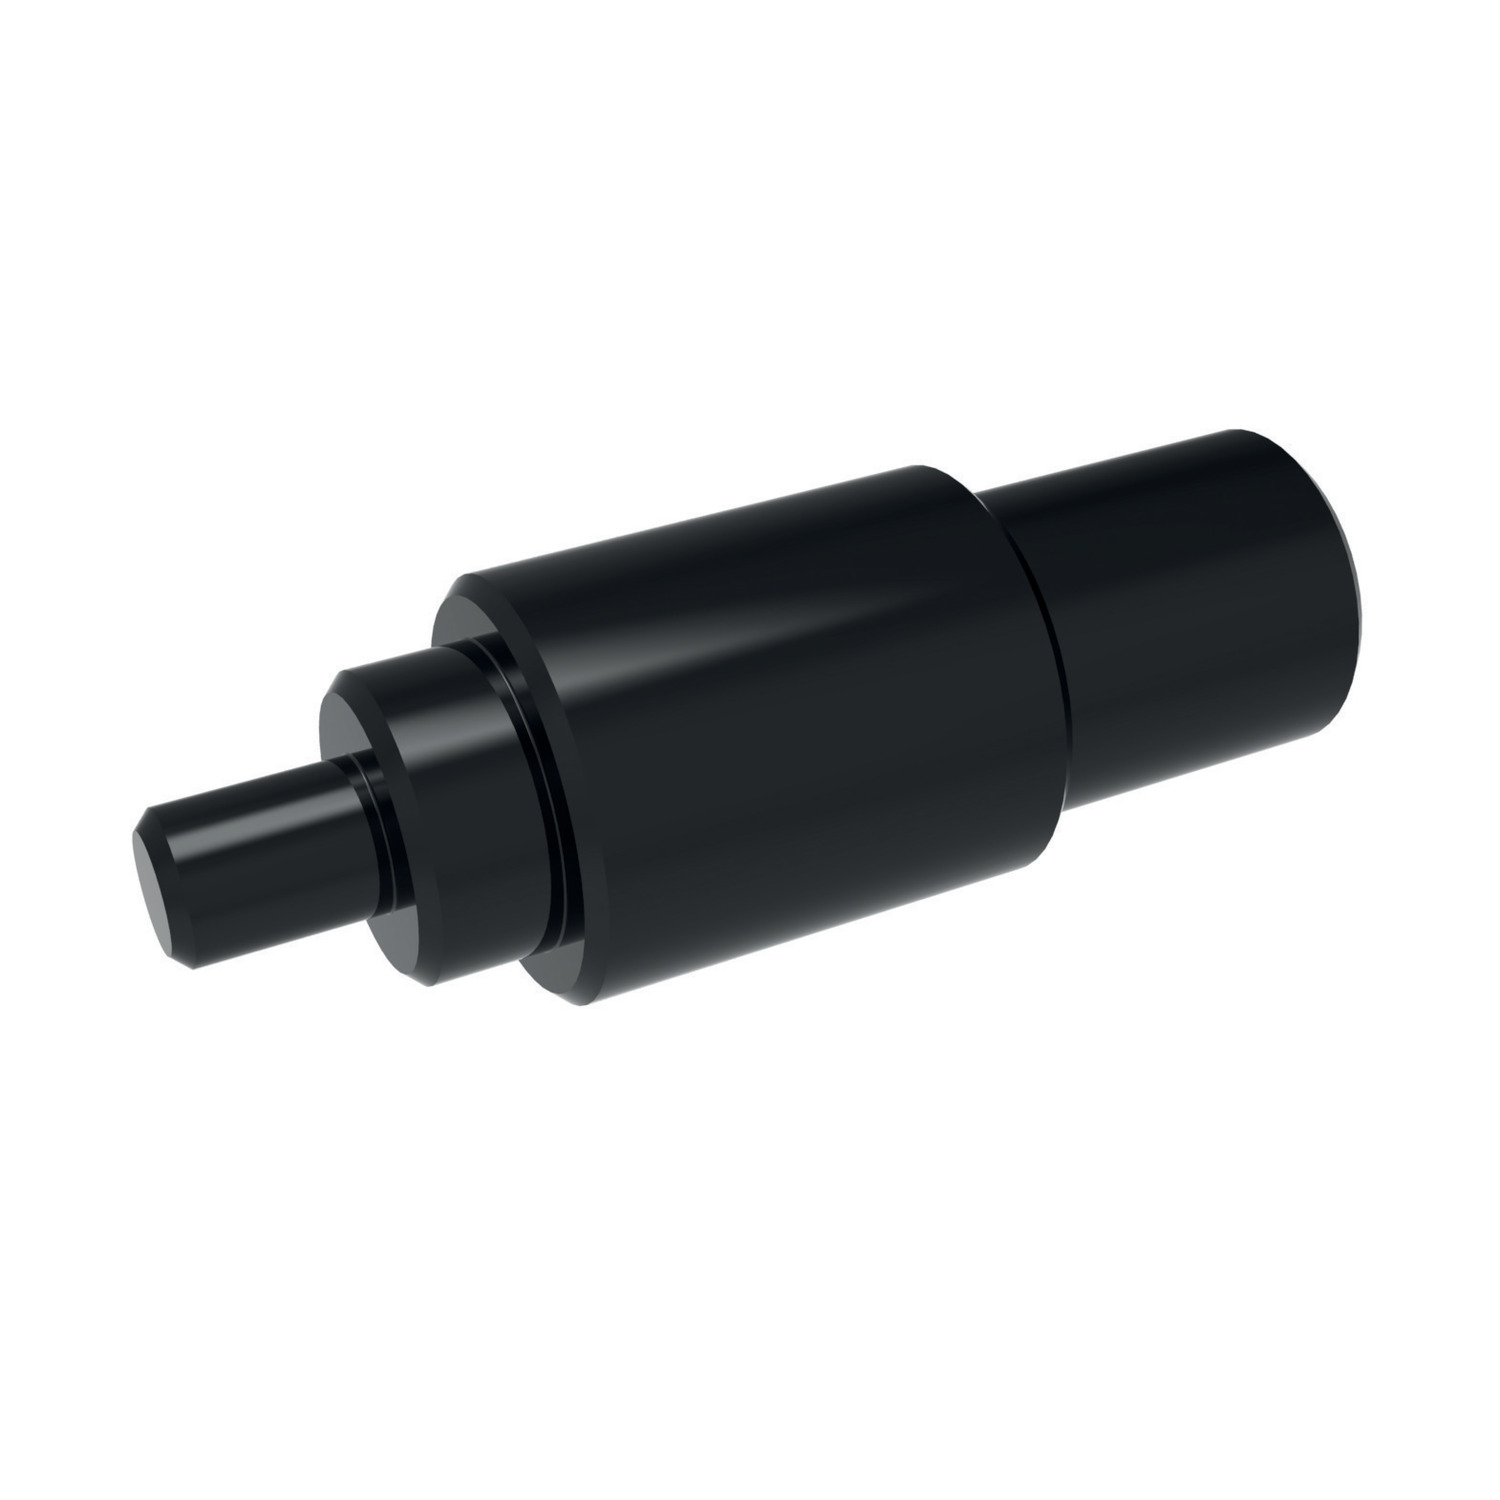 Product 22056, Installation Tool - Inch - Heavy Duty for threaded inserts 22022 & 22032 / 